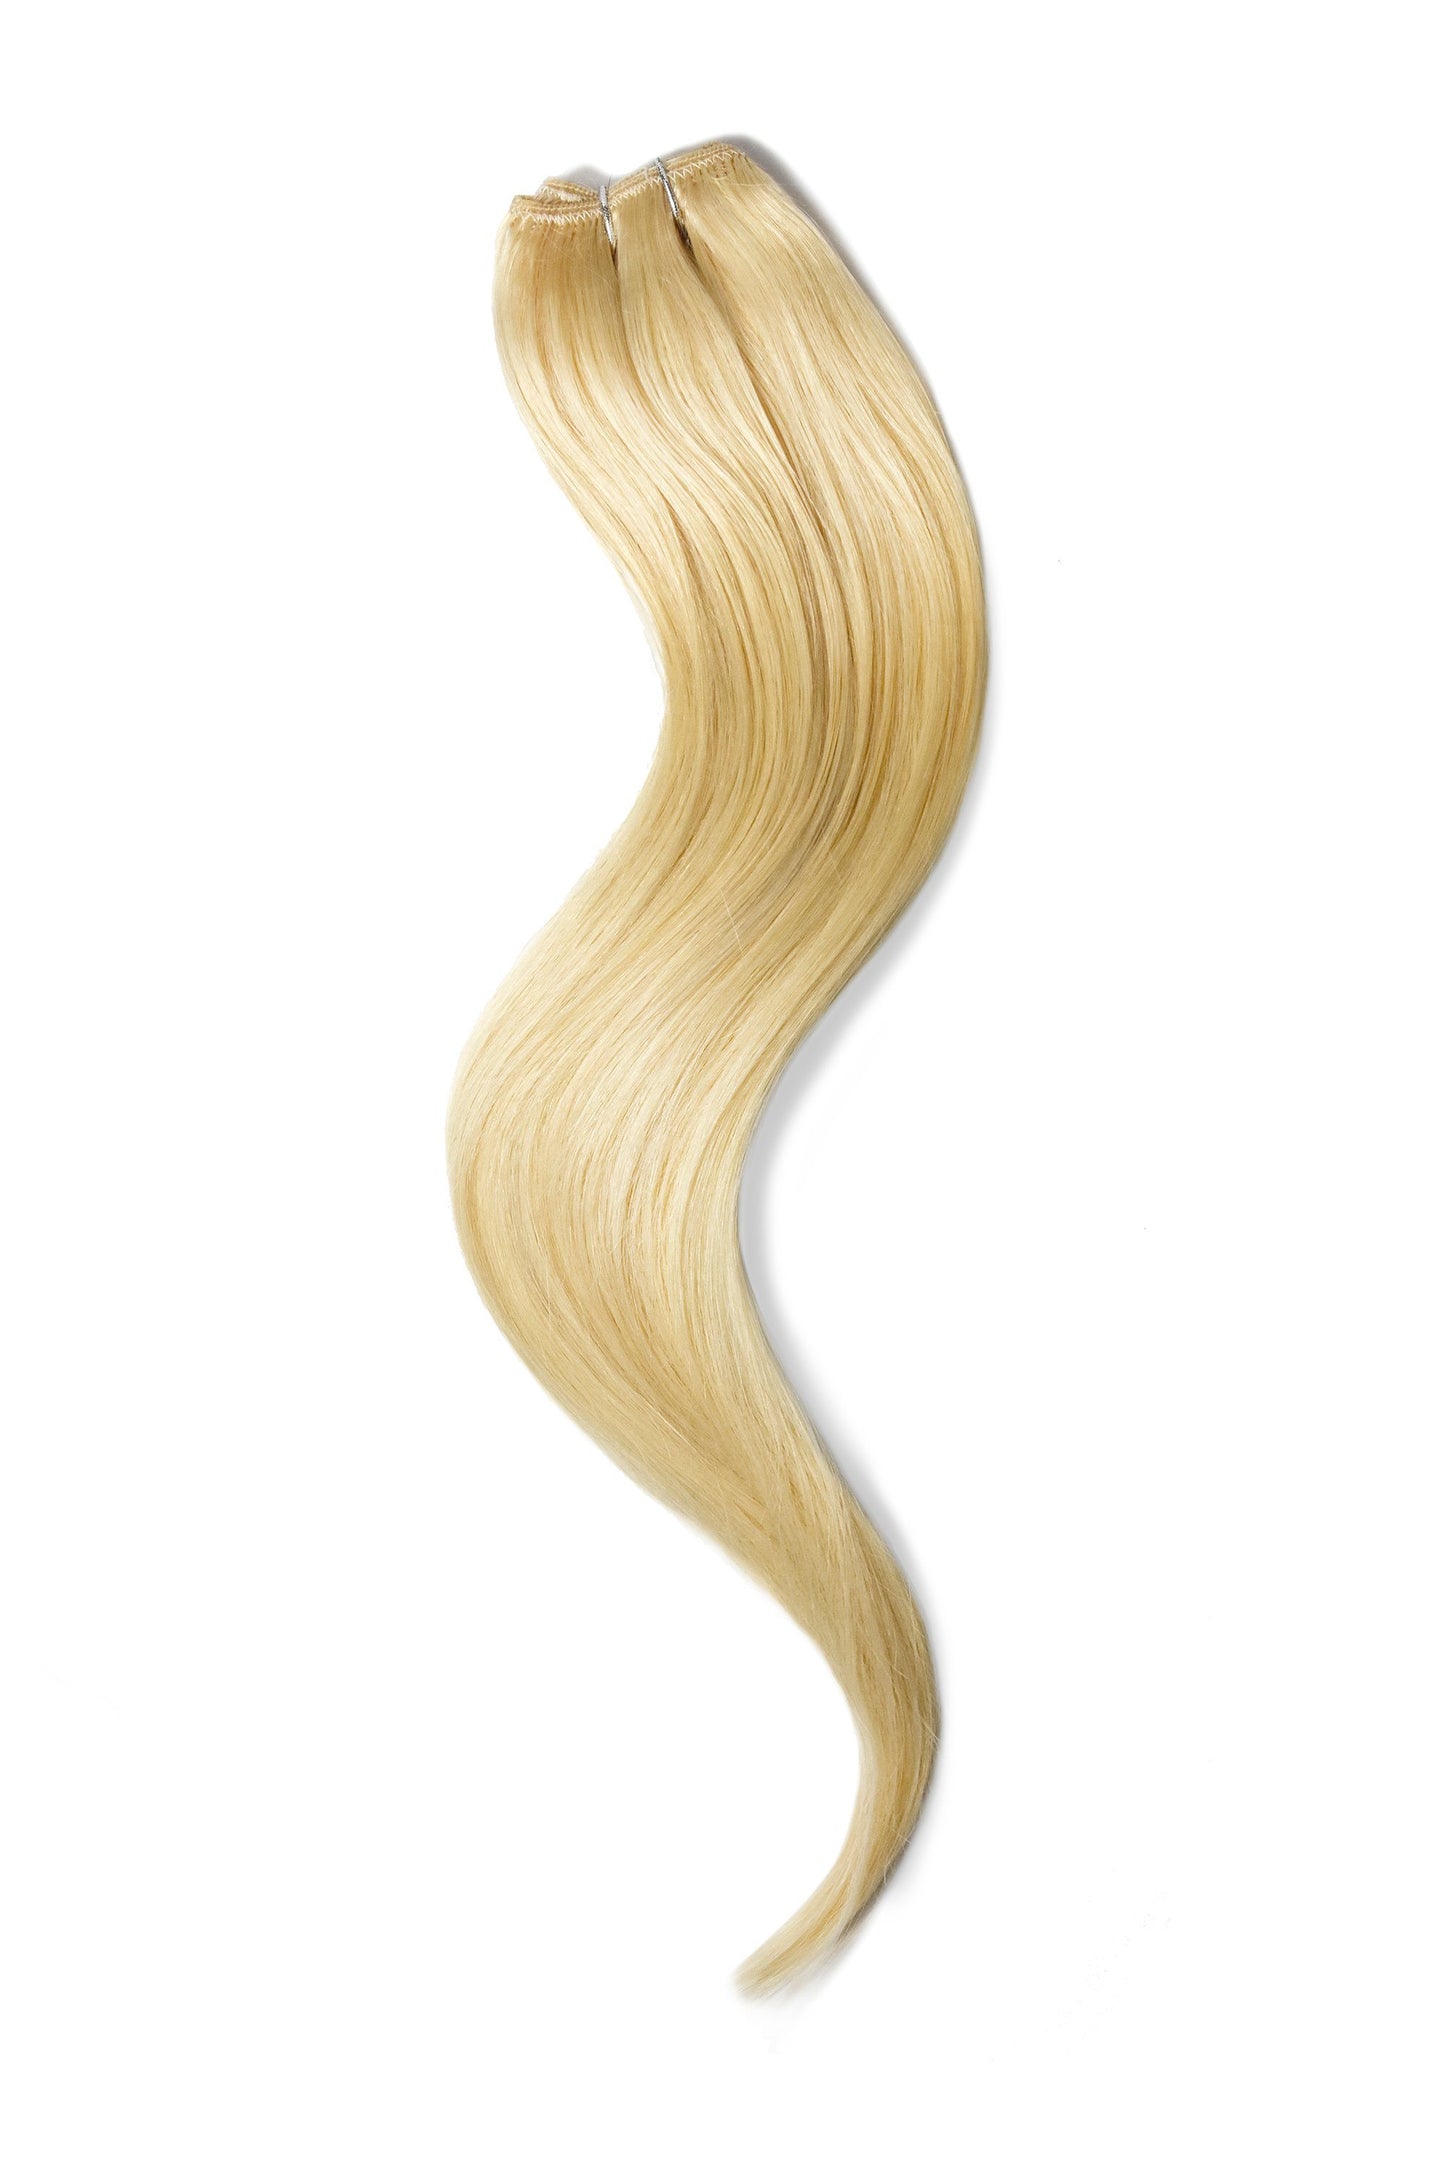 One Piece Top-up Remy Clip in Human Hair Extensions - Light Ash Blonde (#22)